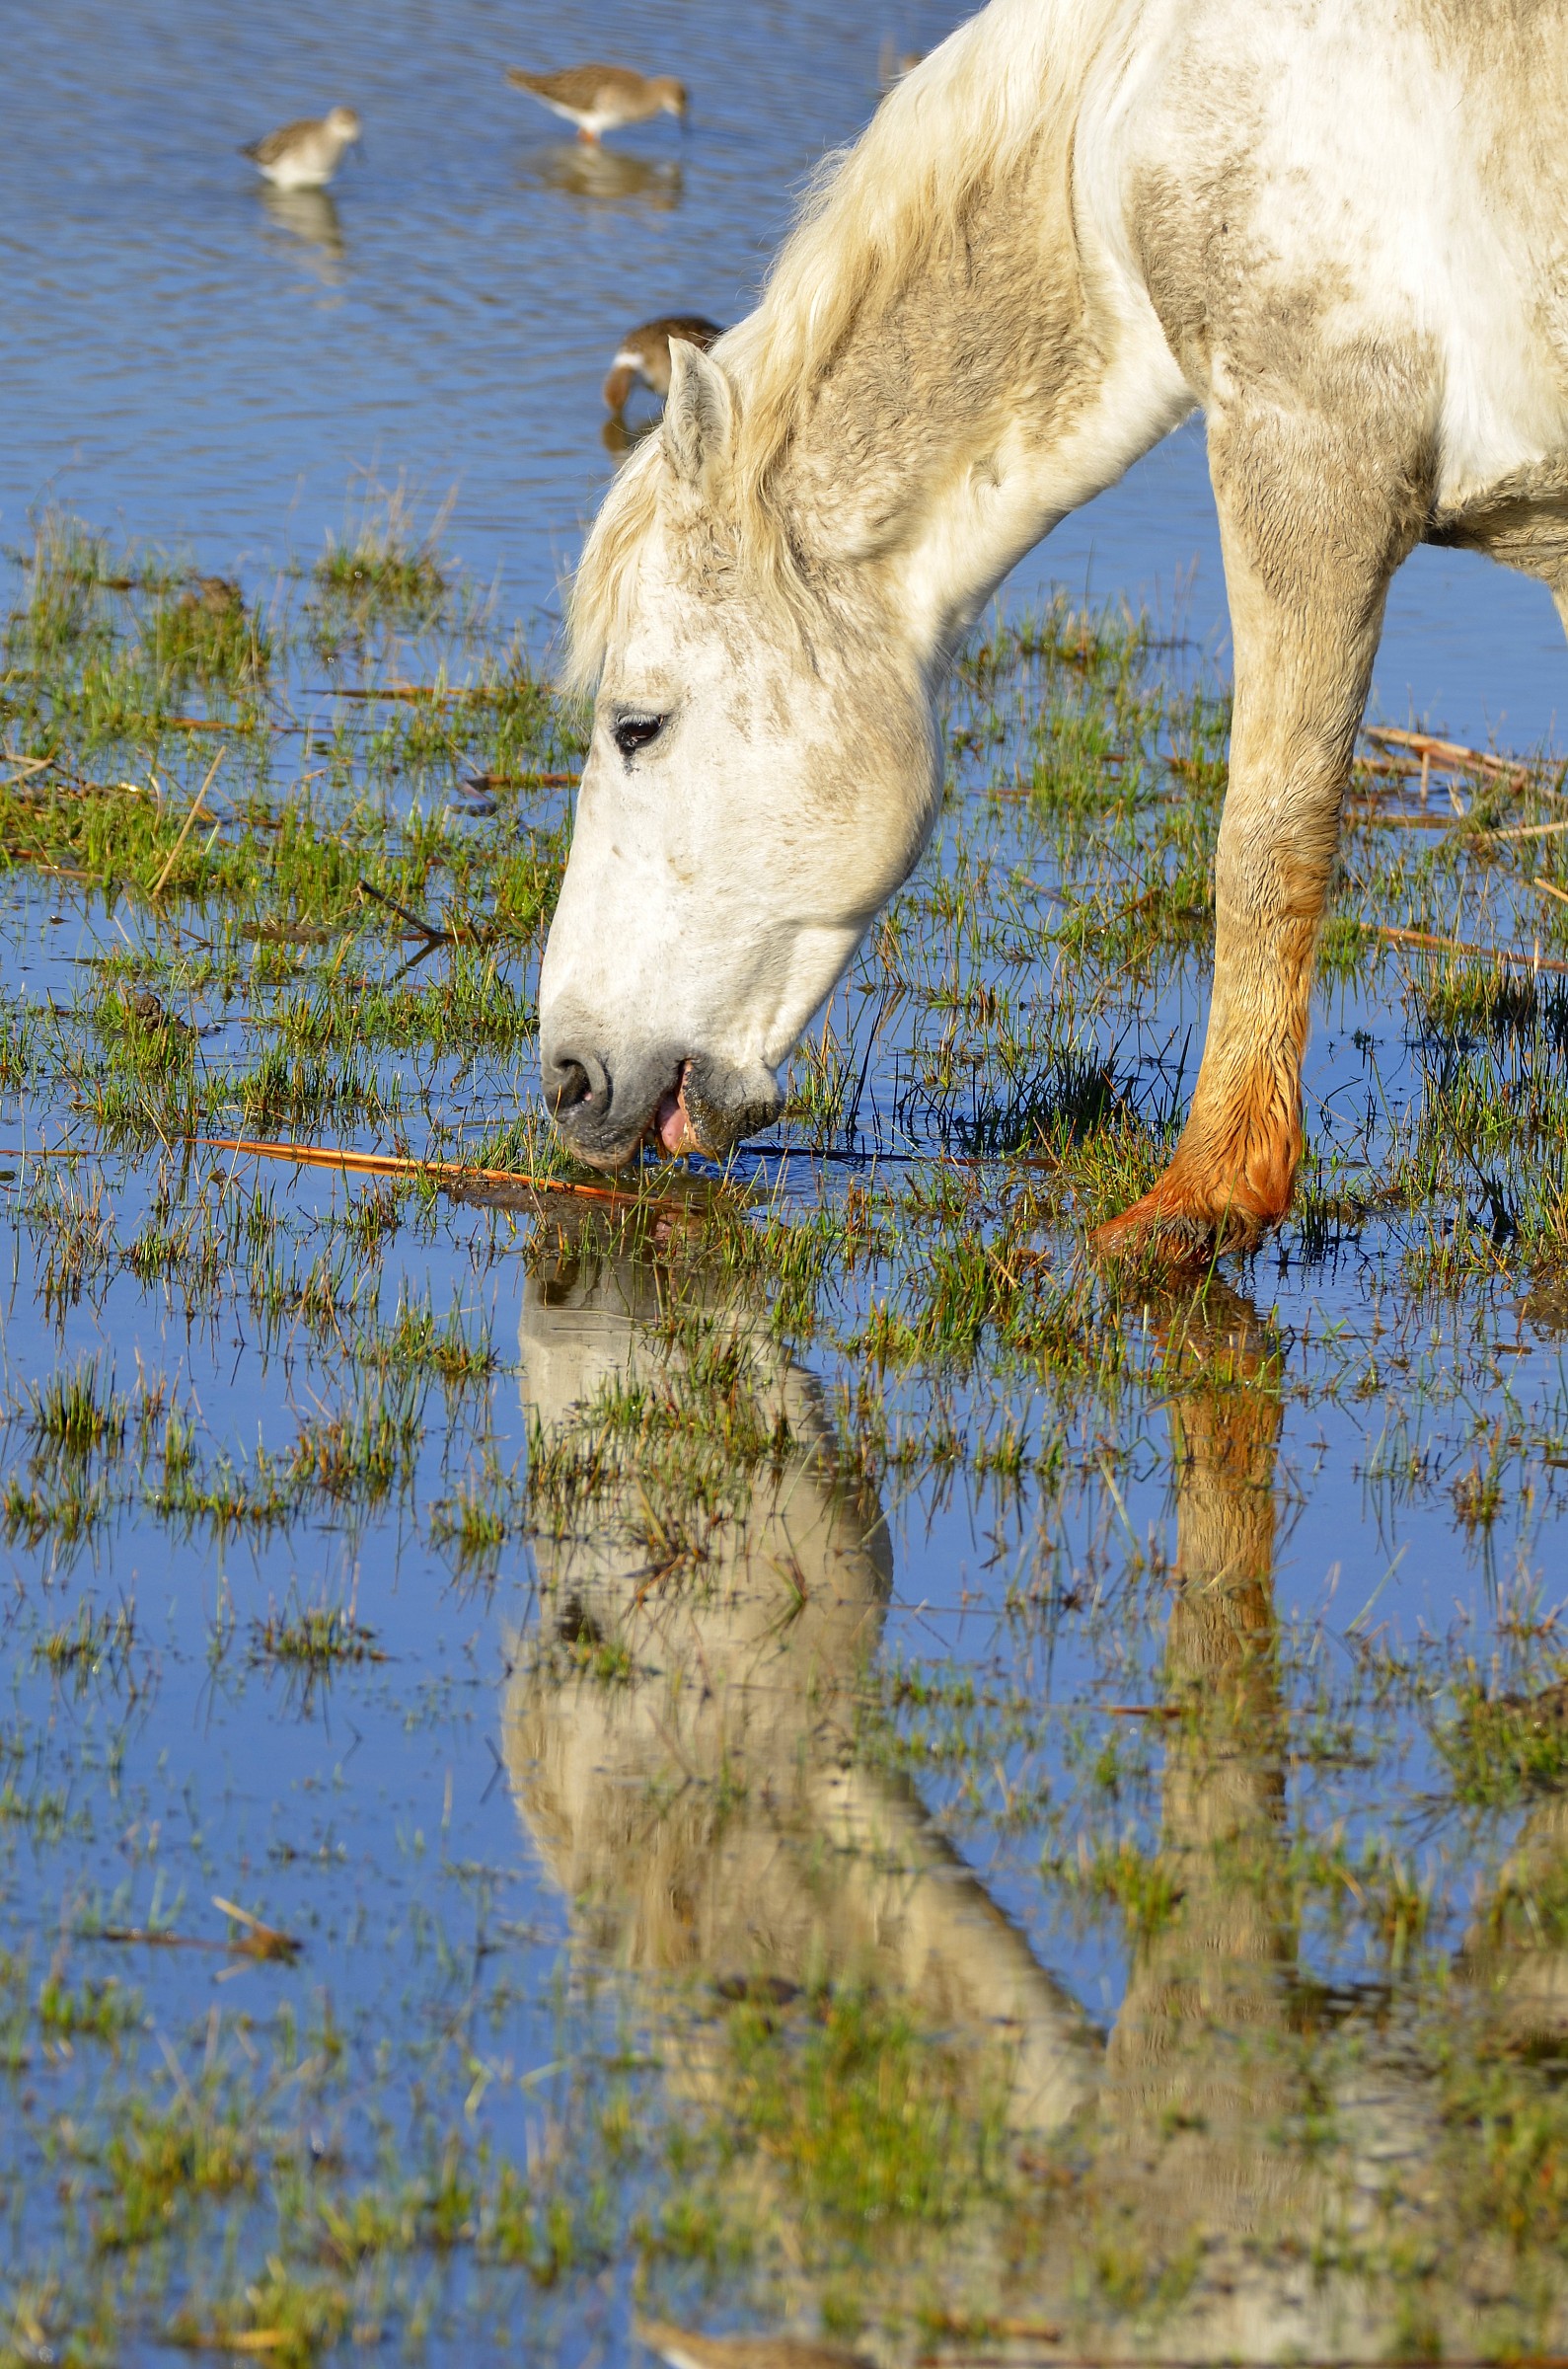 horse in the mirror...